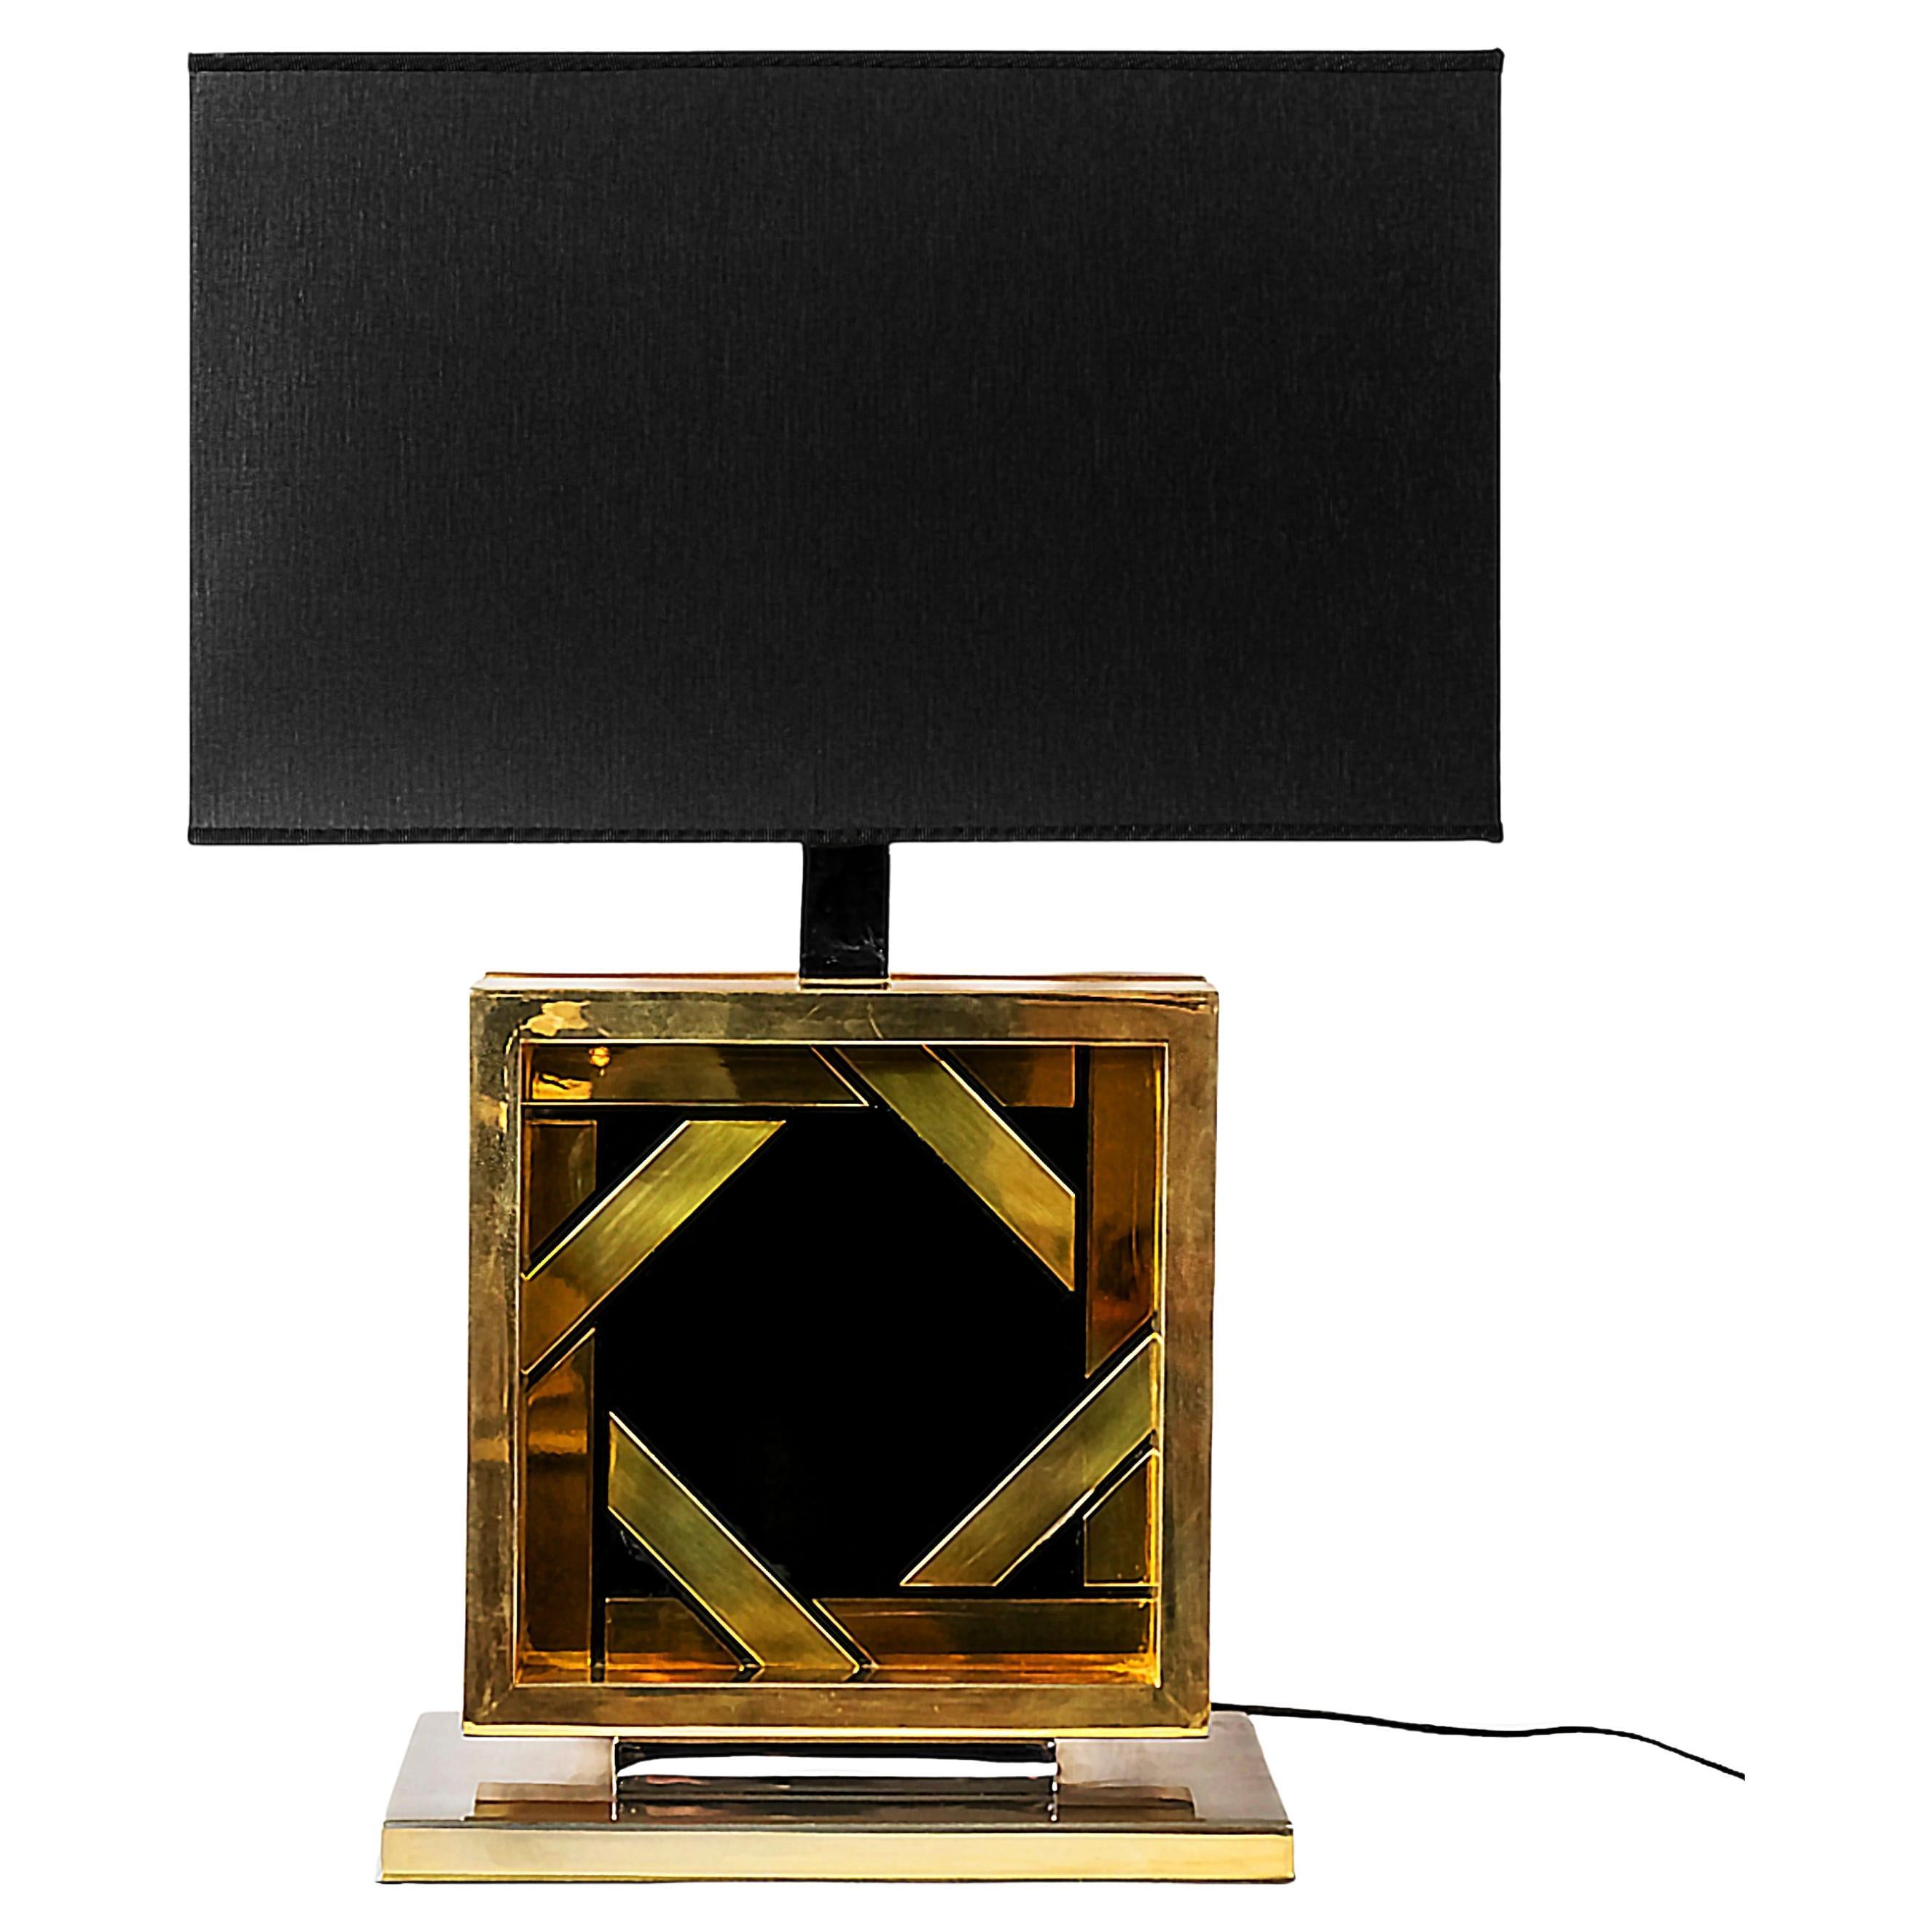 Mid-Century Italian Romeo Rega design/style table lamp in chrome, brass and black glass. 
The shade is new made in satin finish black textile with gold color inside.